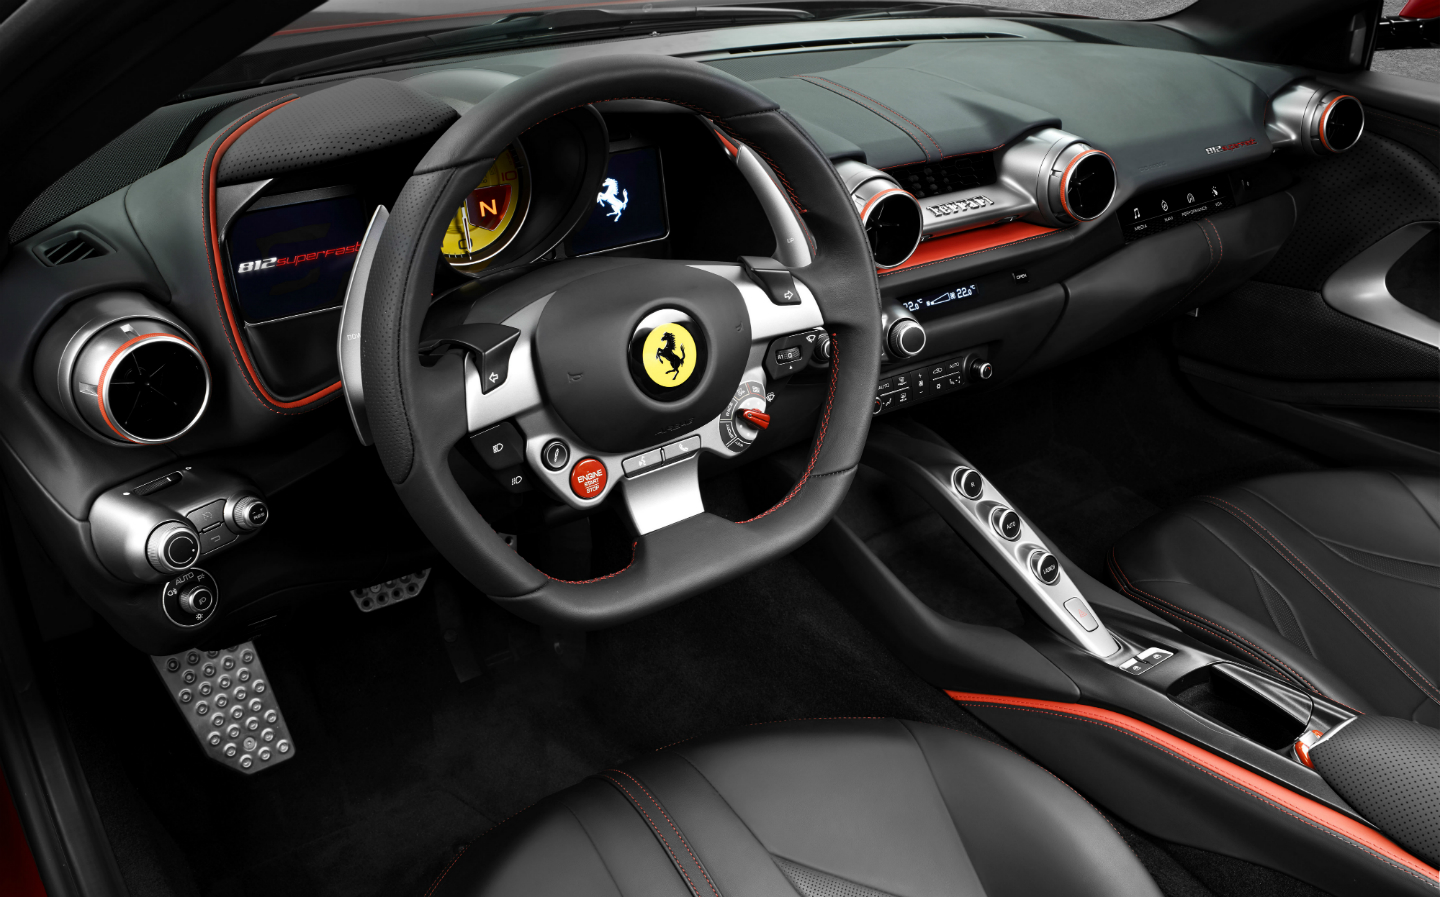 How fast is ‘superfast’? Over 211mph, says Ferrari of its new 812 Superfast